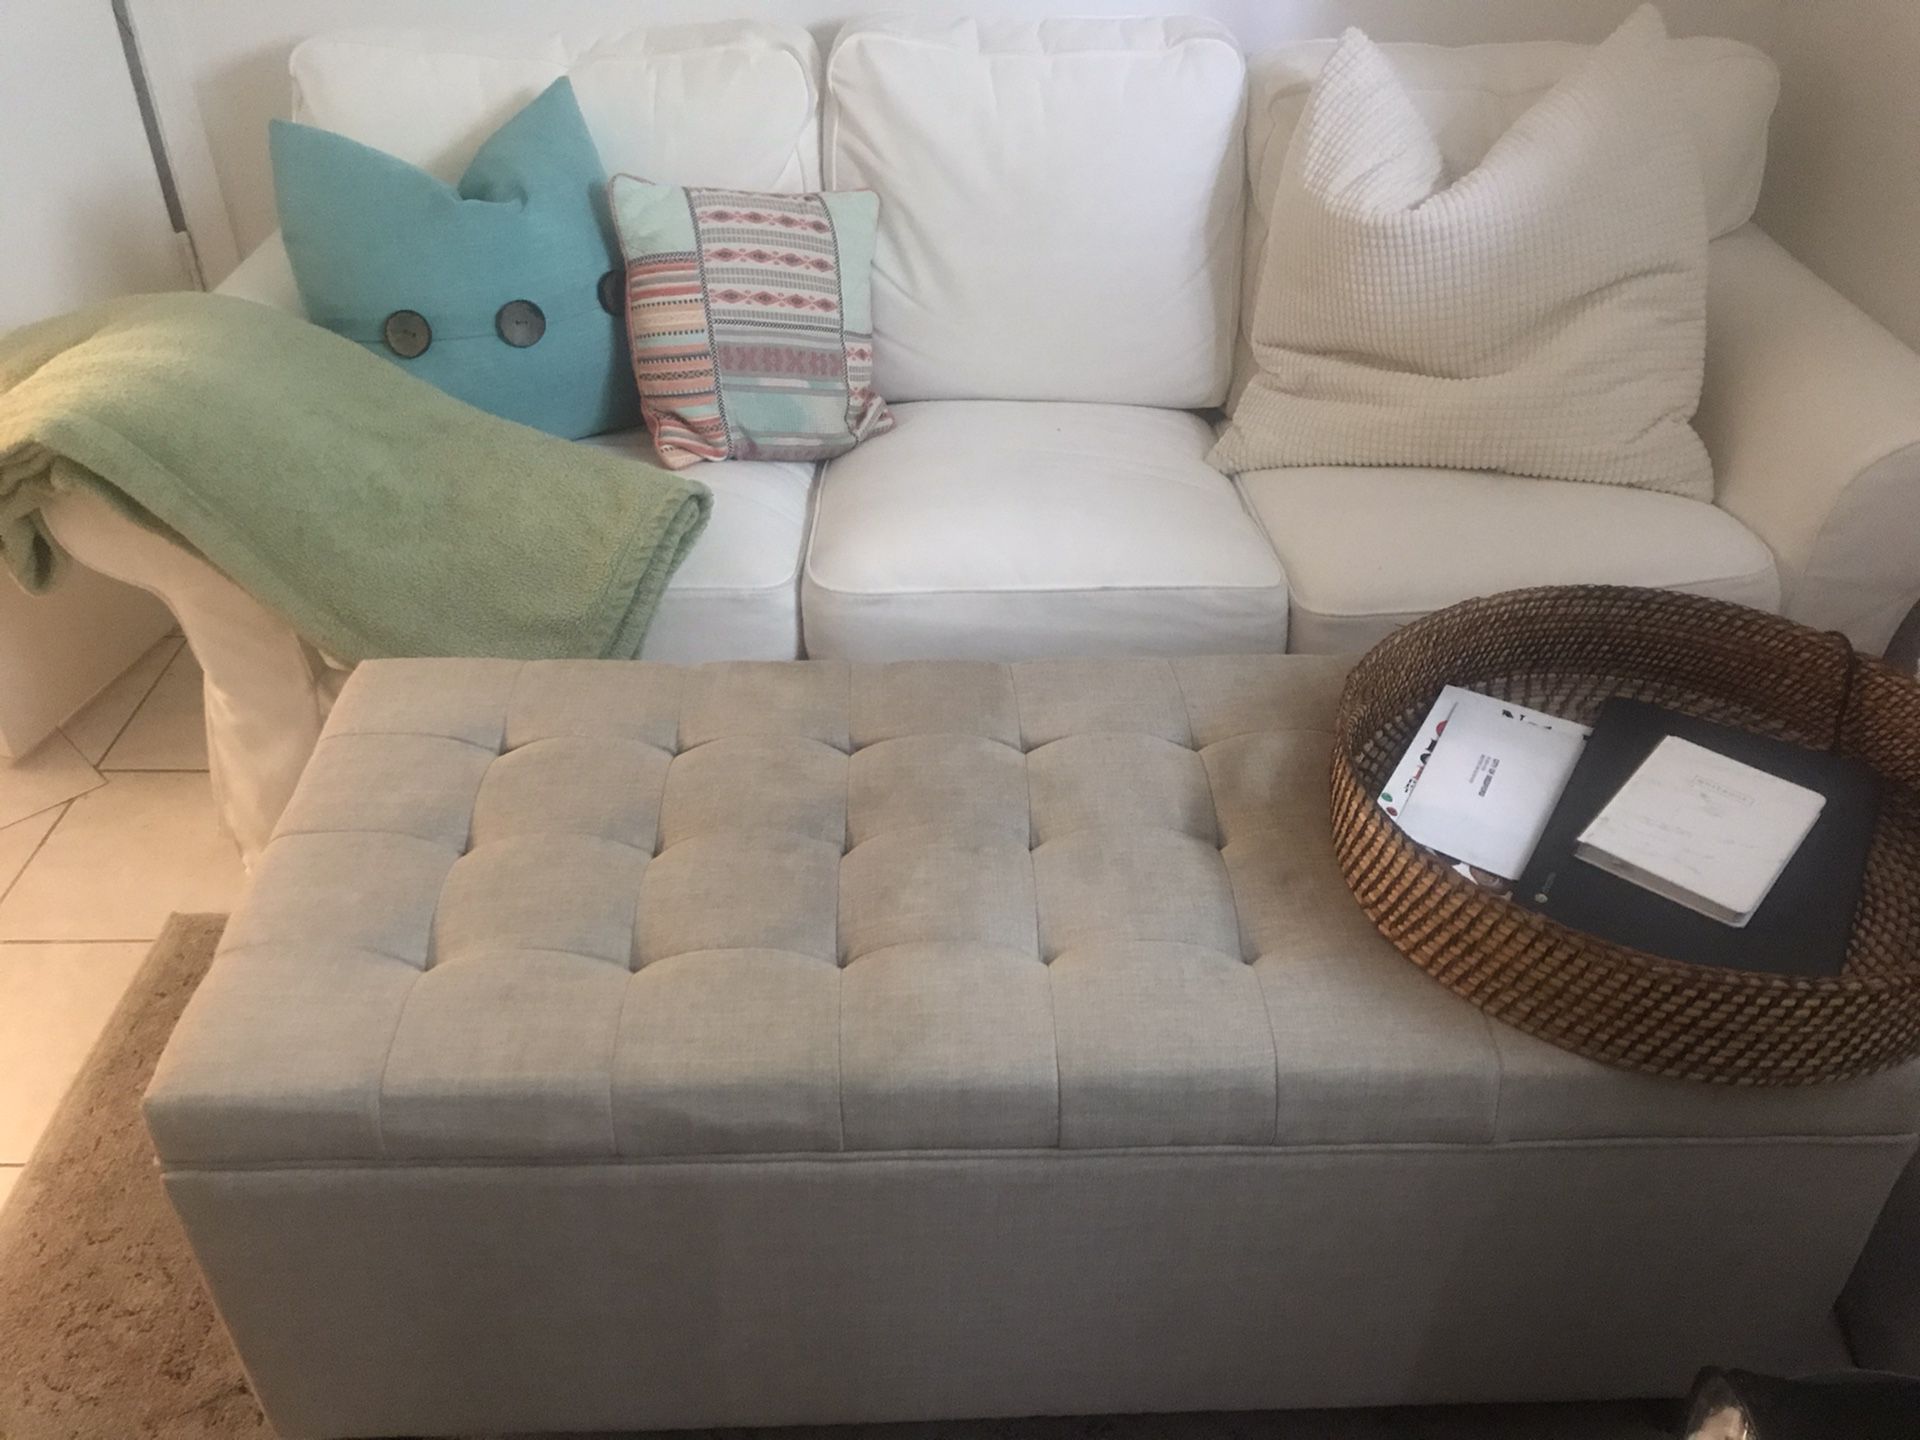 White couch, ottoman, white bookcase, beach wood console, black bookcase, brown sectional, 50” TV, 19” TV, brand new iPods, IPad Air, and much more!!